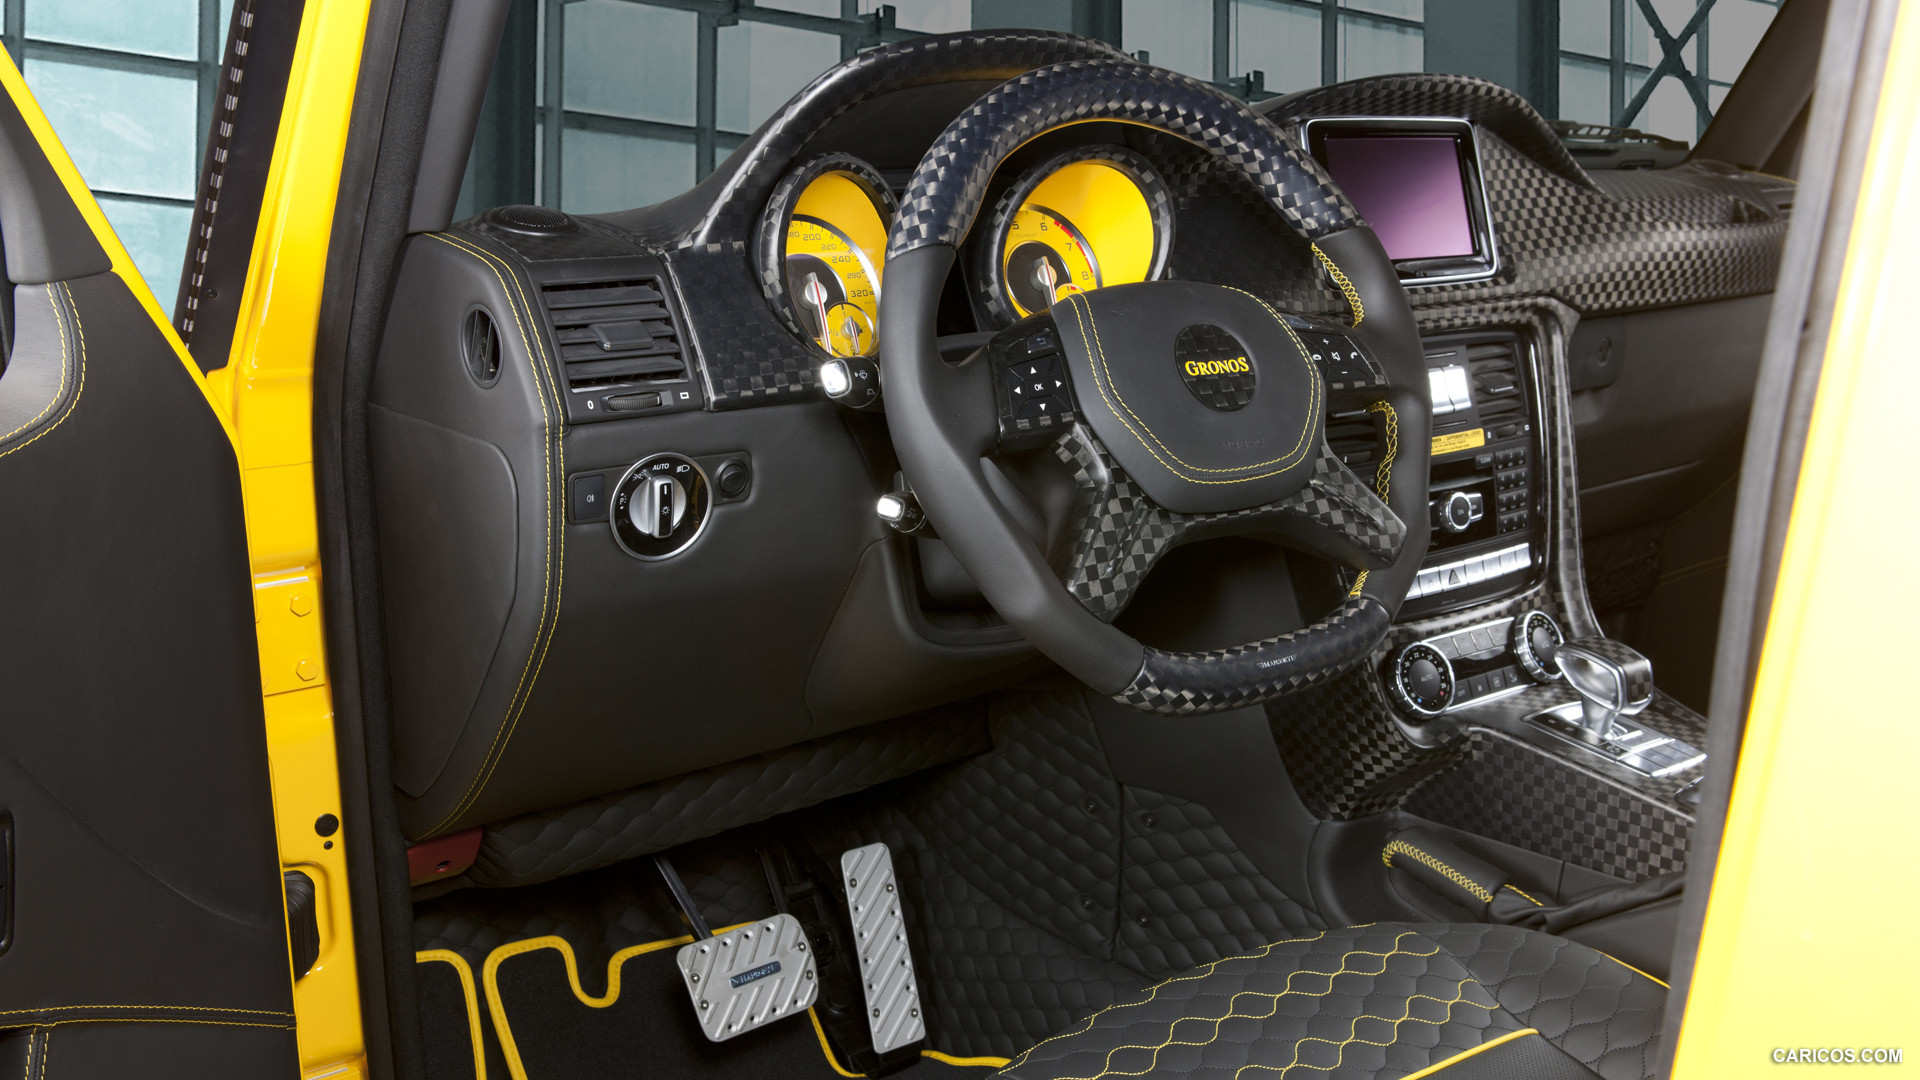 2013 Mansory Gronos based on Mercedes-Benz G-Class AMG  - Interior, #3 of 7